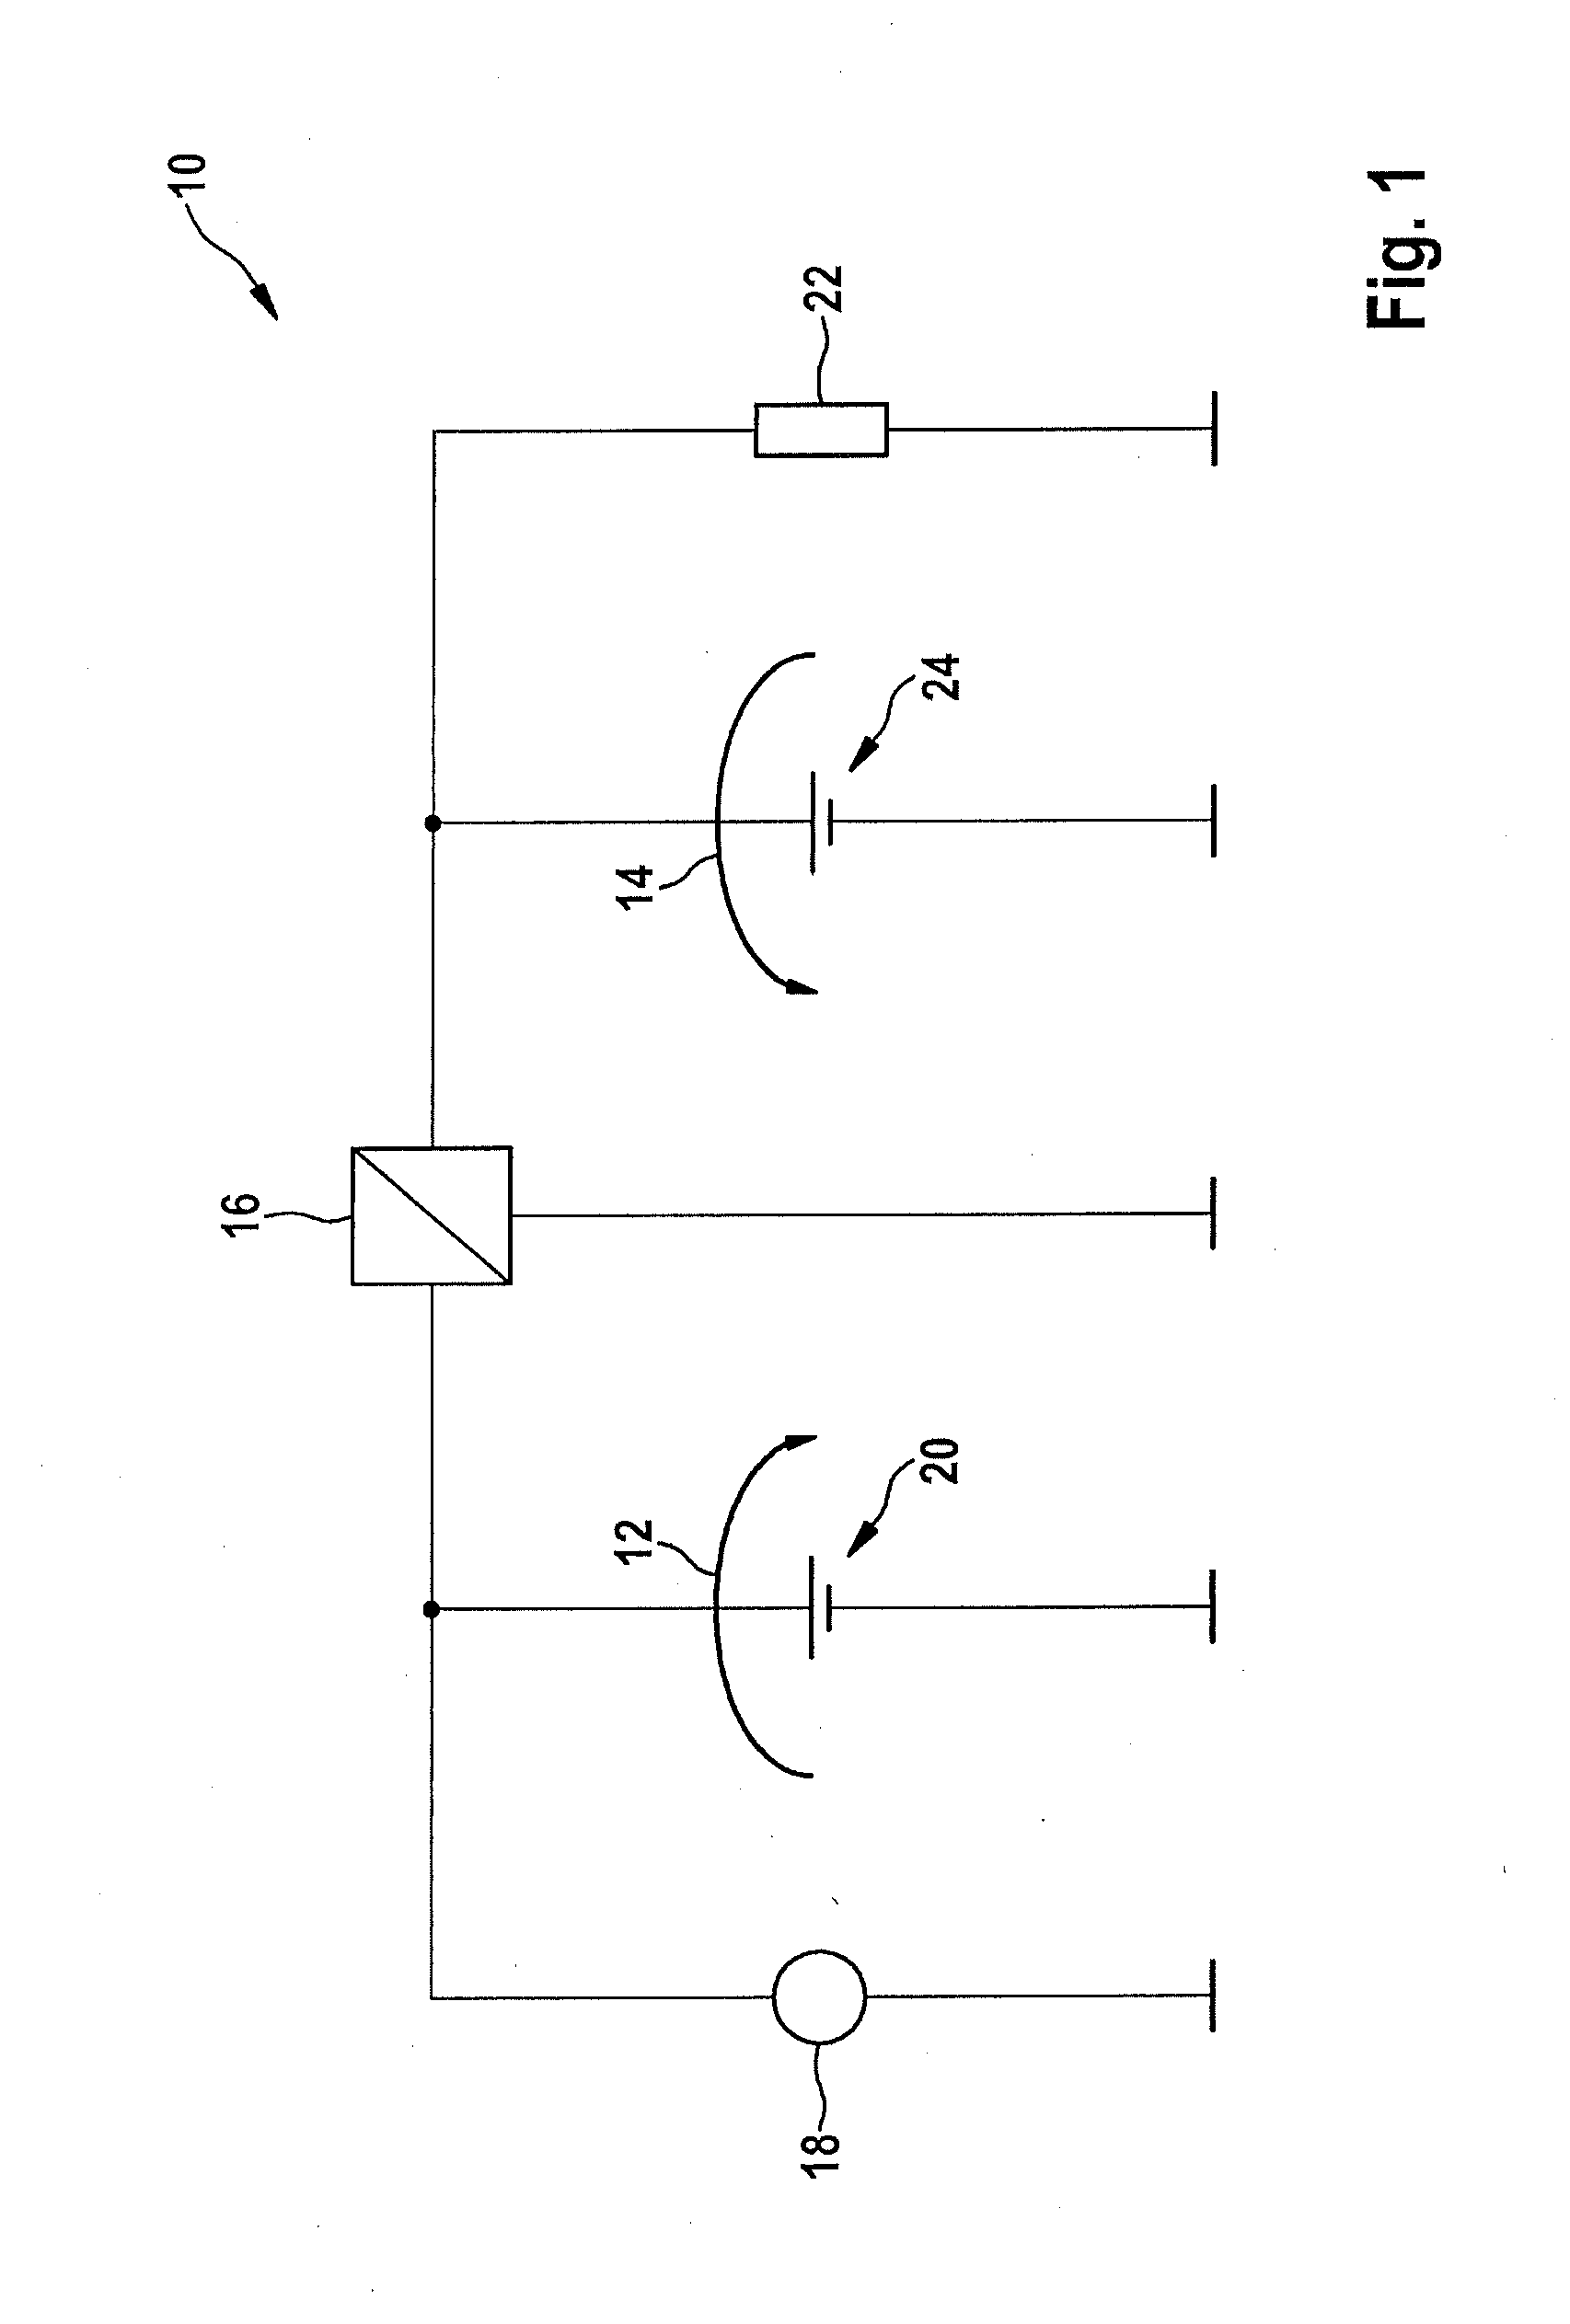 Protective circuit assemblage for a multi-voltage electrical system